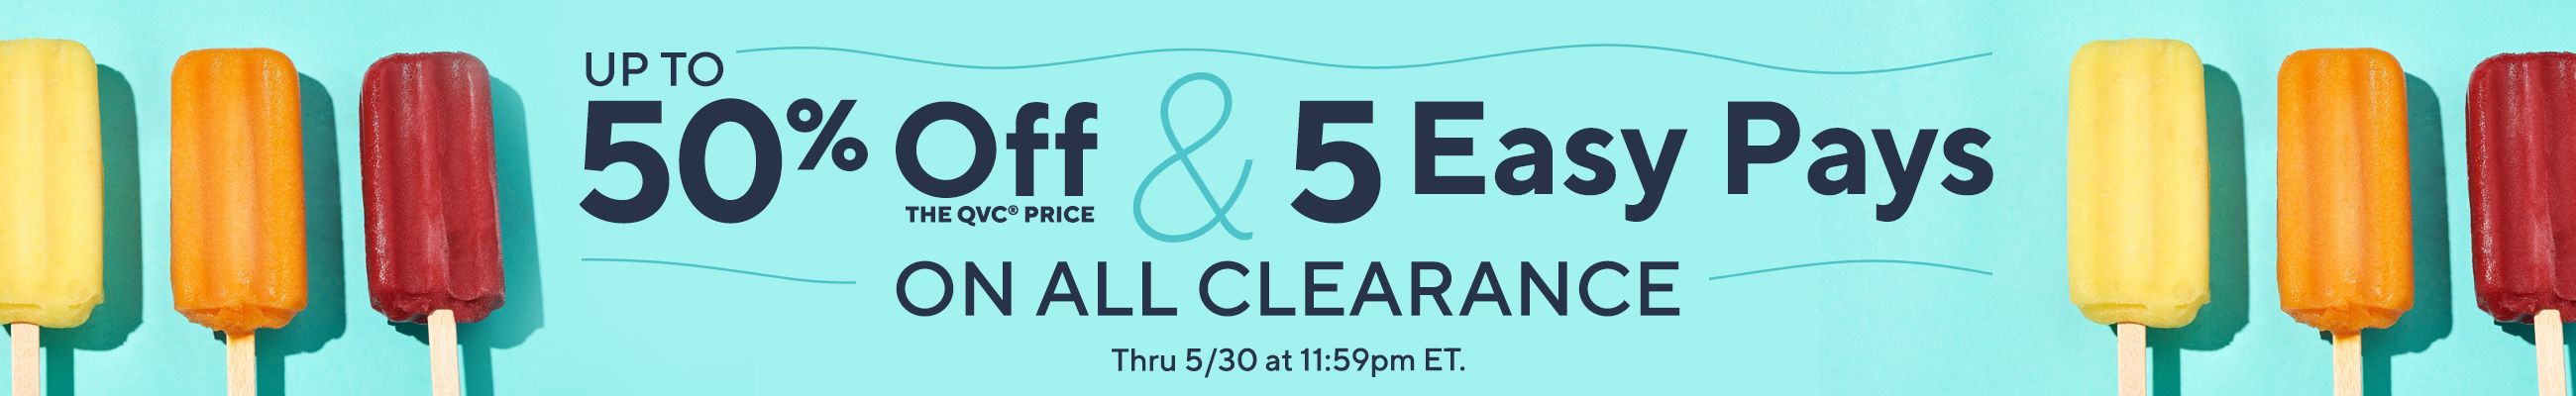 Up to 50% Off the QVC® Price & 5 Easy Pays on All Clearance. Thru 5/30 at 11:59pm ET.